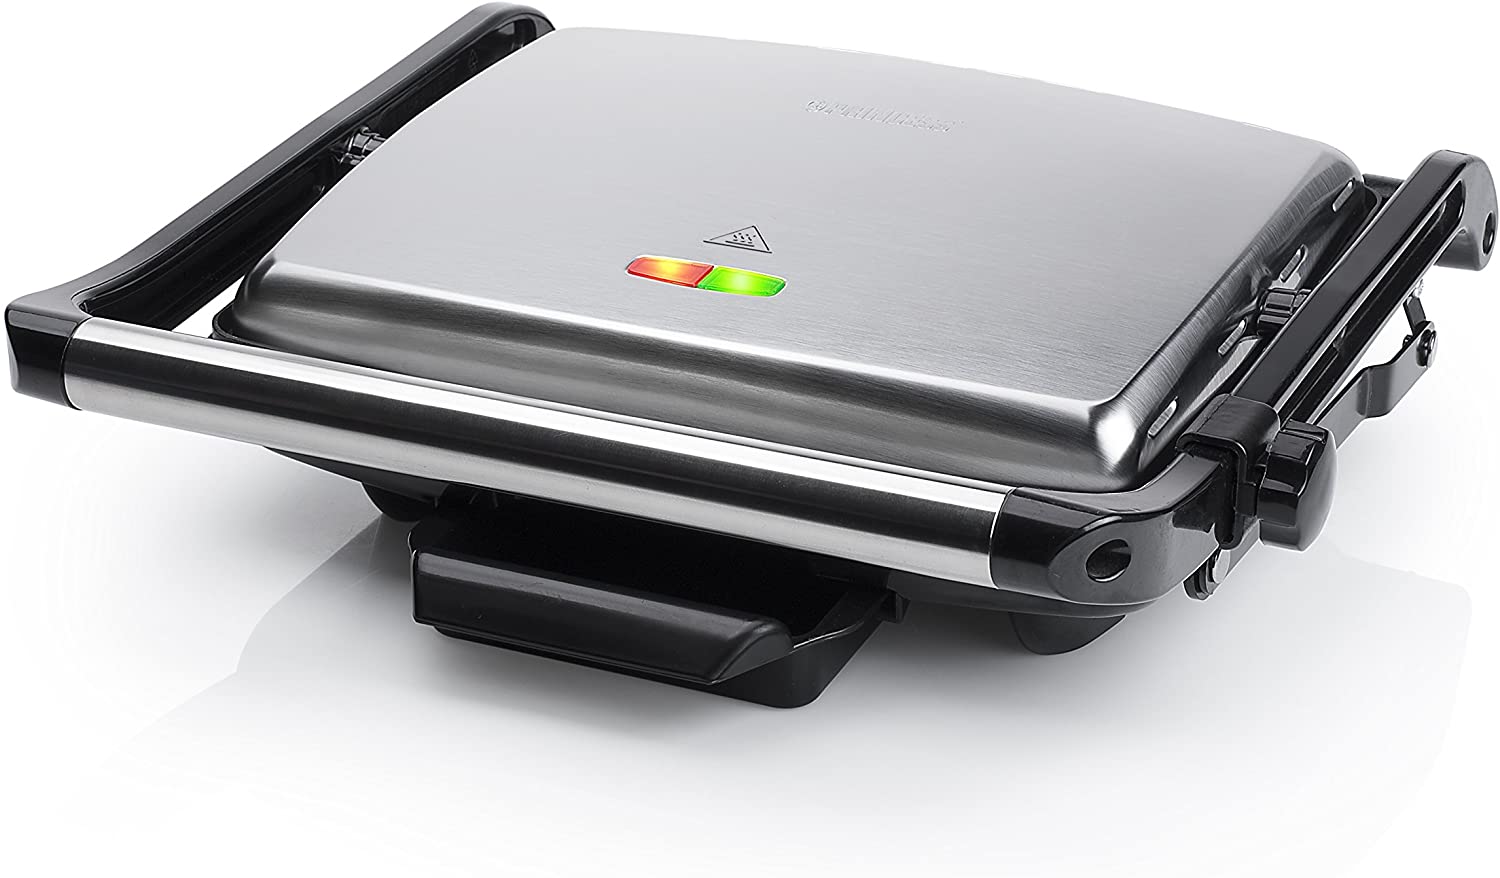 Princess Panini 112413 Grill / Sandwich Maker with Integrated Grease Tray and Handle